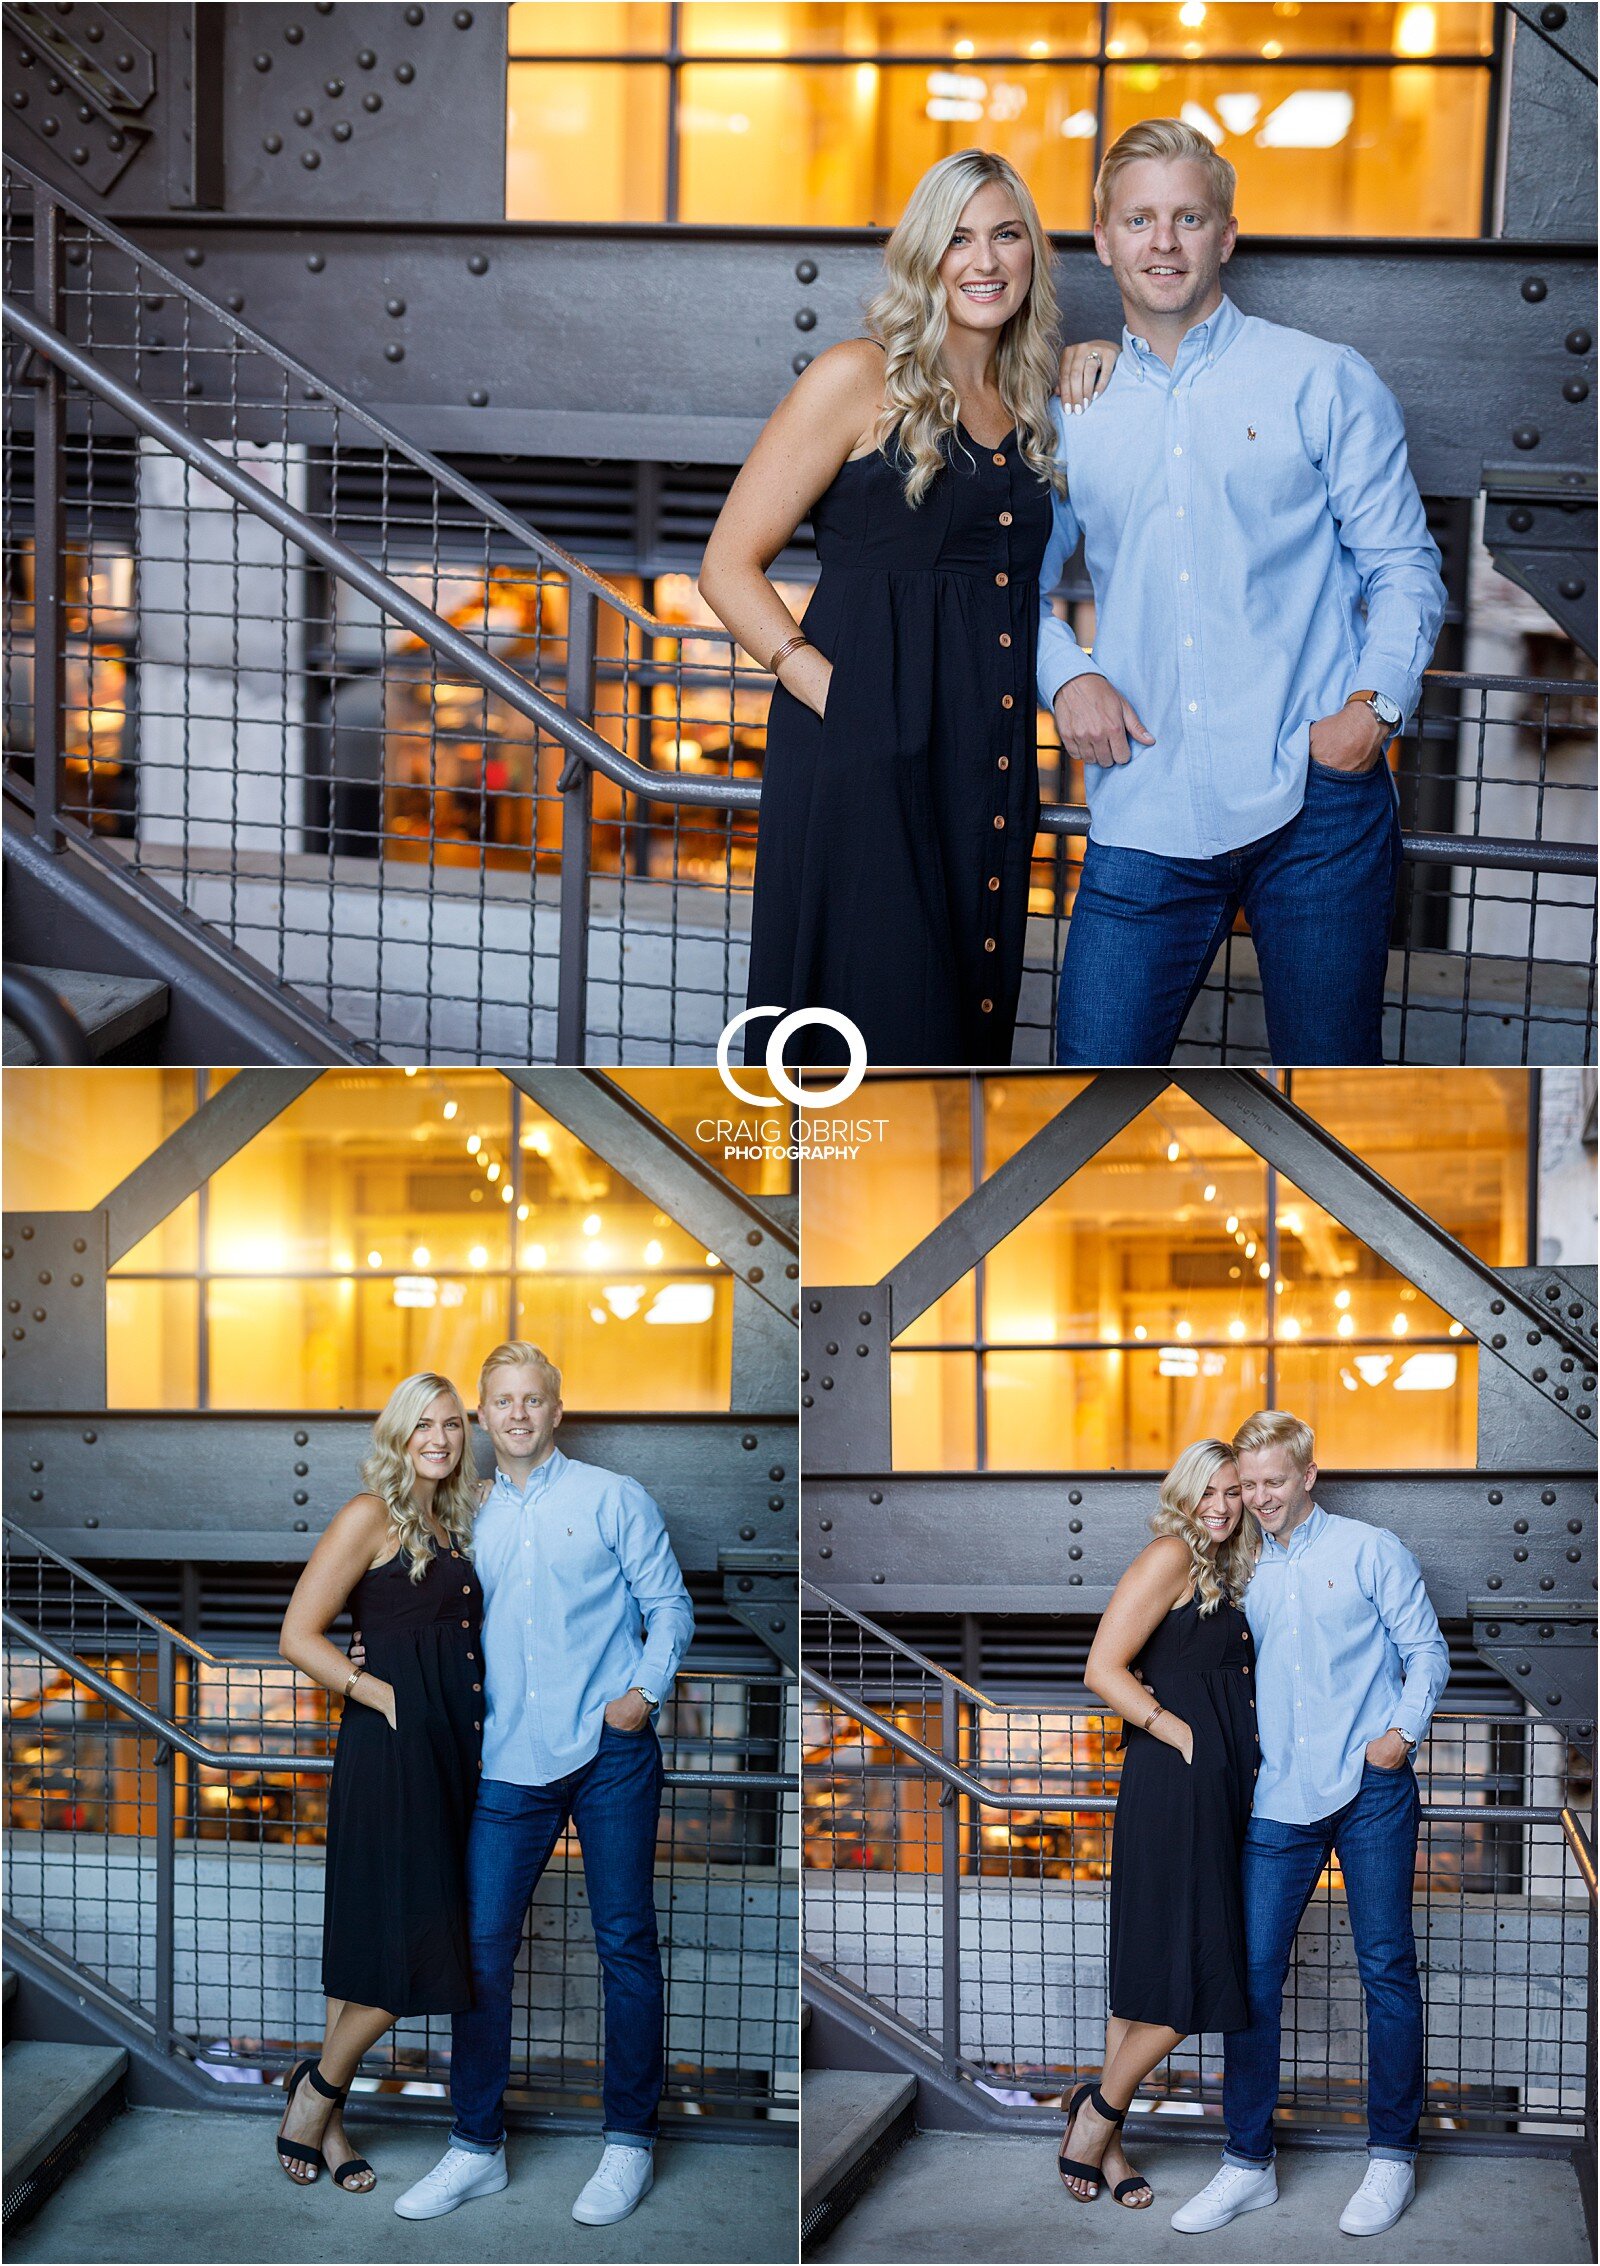 Cator Woolford Ponce city market rooftop sunset engagement portraits atlanta_0027.jpg